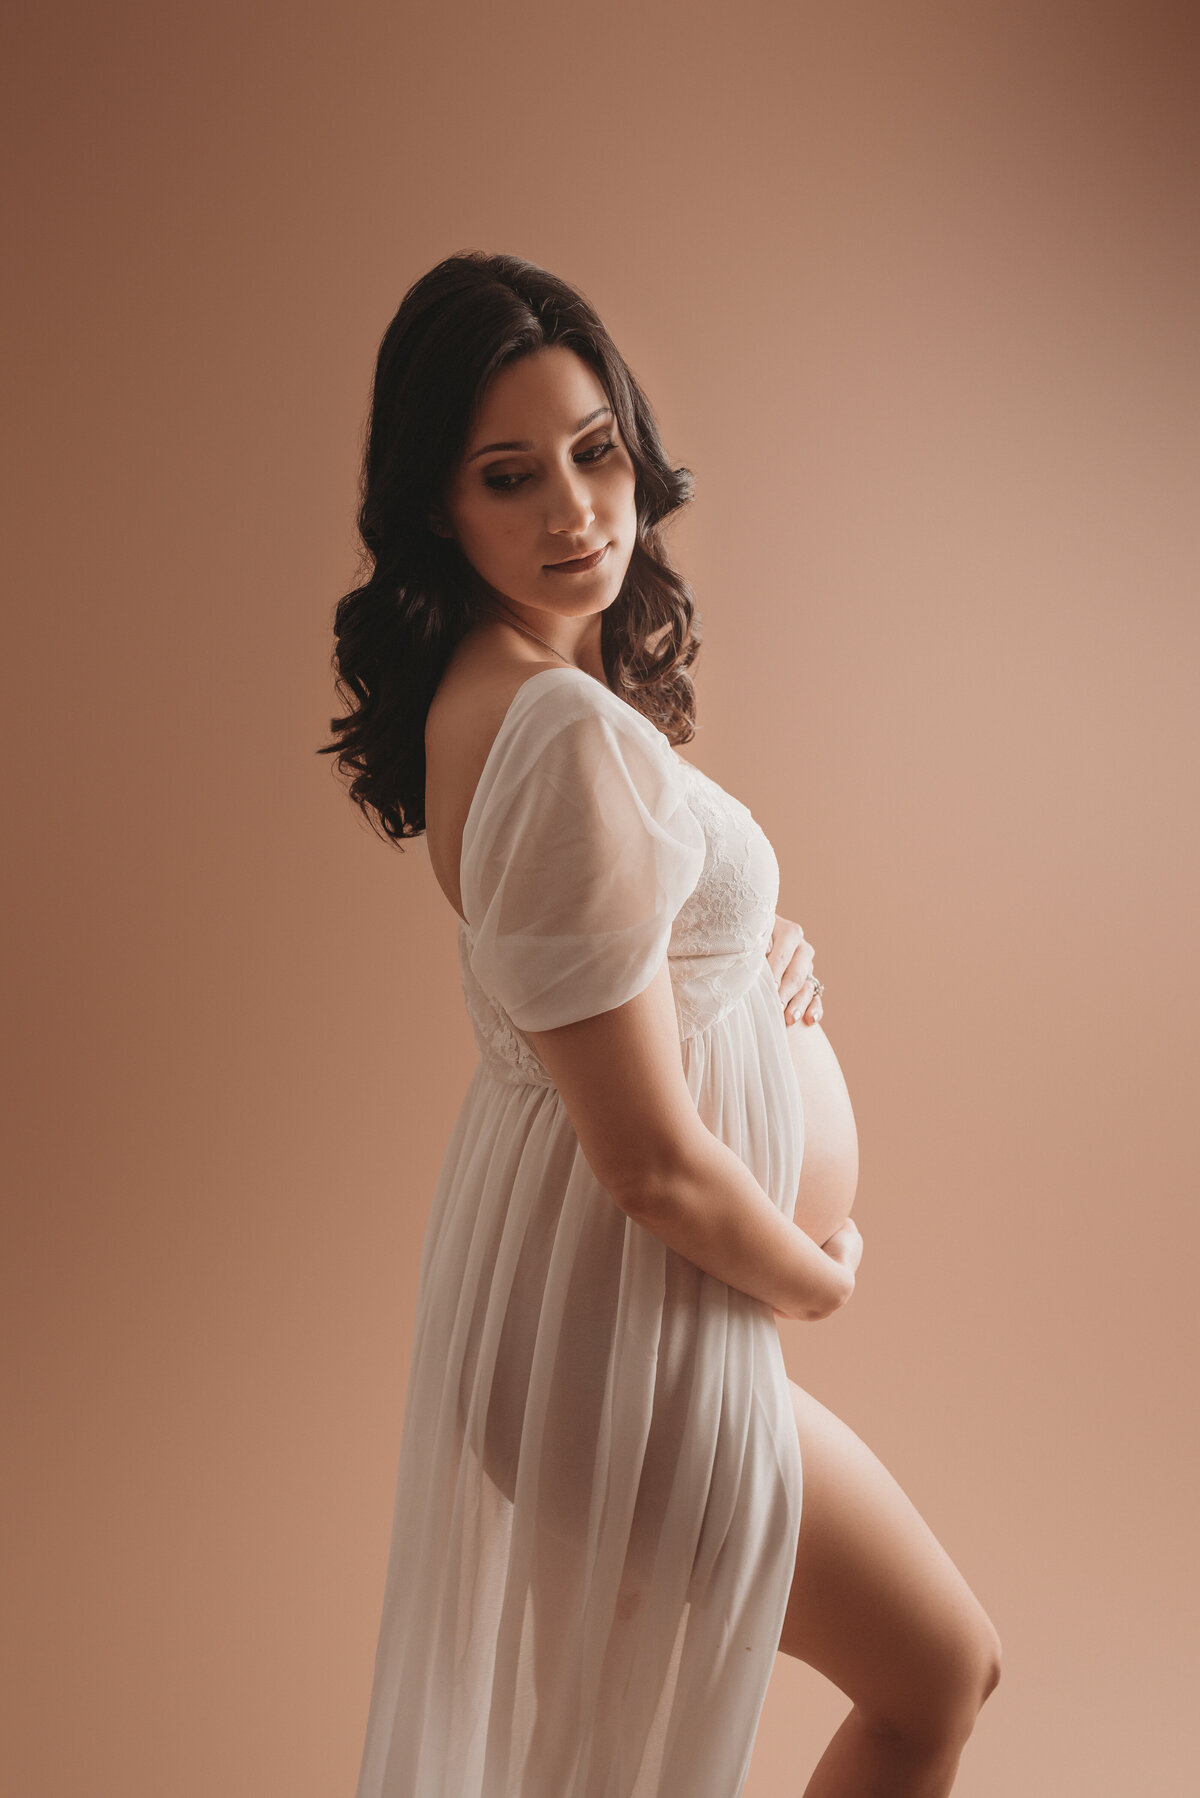 Maternity portrait on tan backdrop of brown haired woman wearing white sheer dress showing her baby bump looking over shoulder